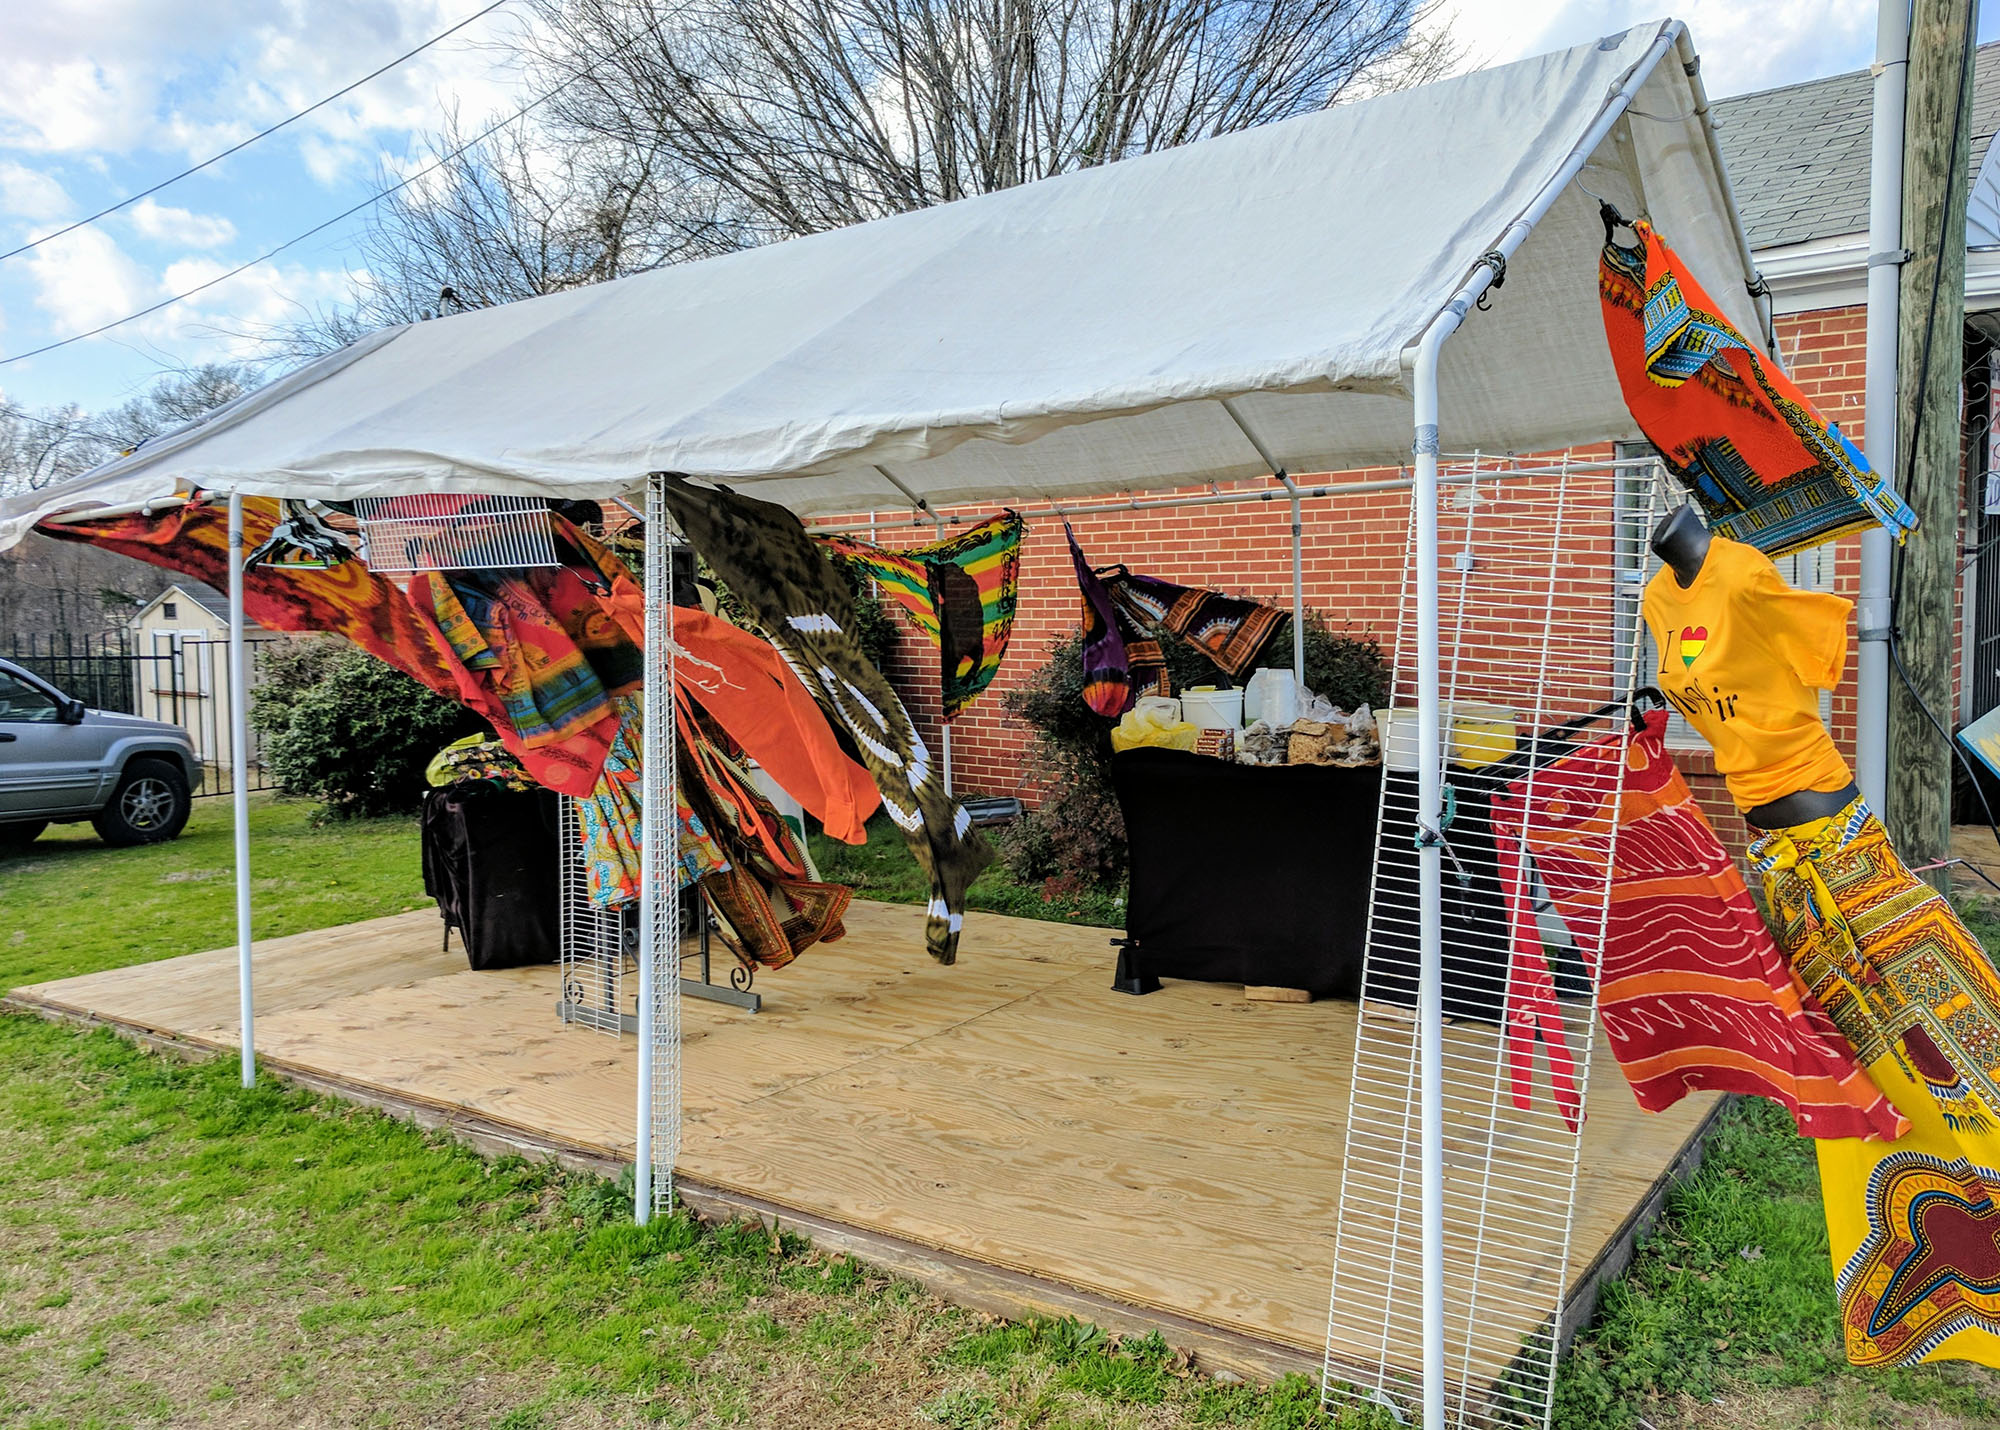 The wind whips a tent set up for the pop-up market "Tushea," a business that sells garments and African soaps made with shea butter. (Staff photo by Brian Shurney)